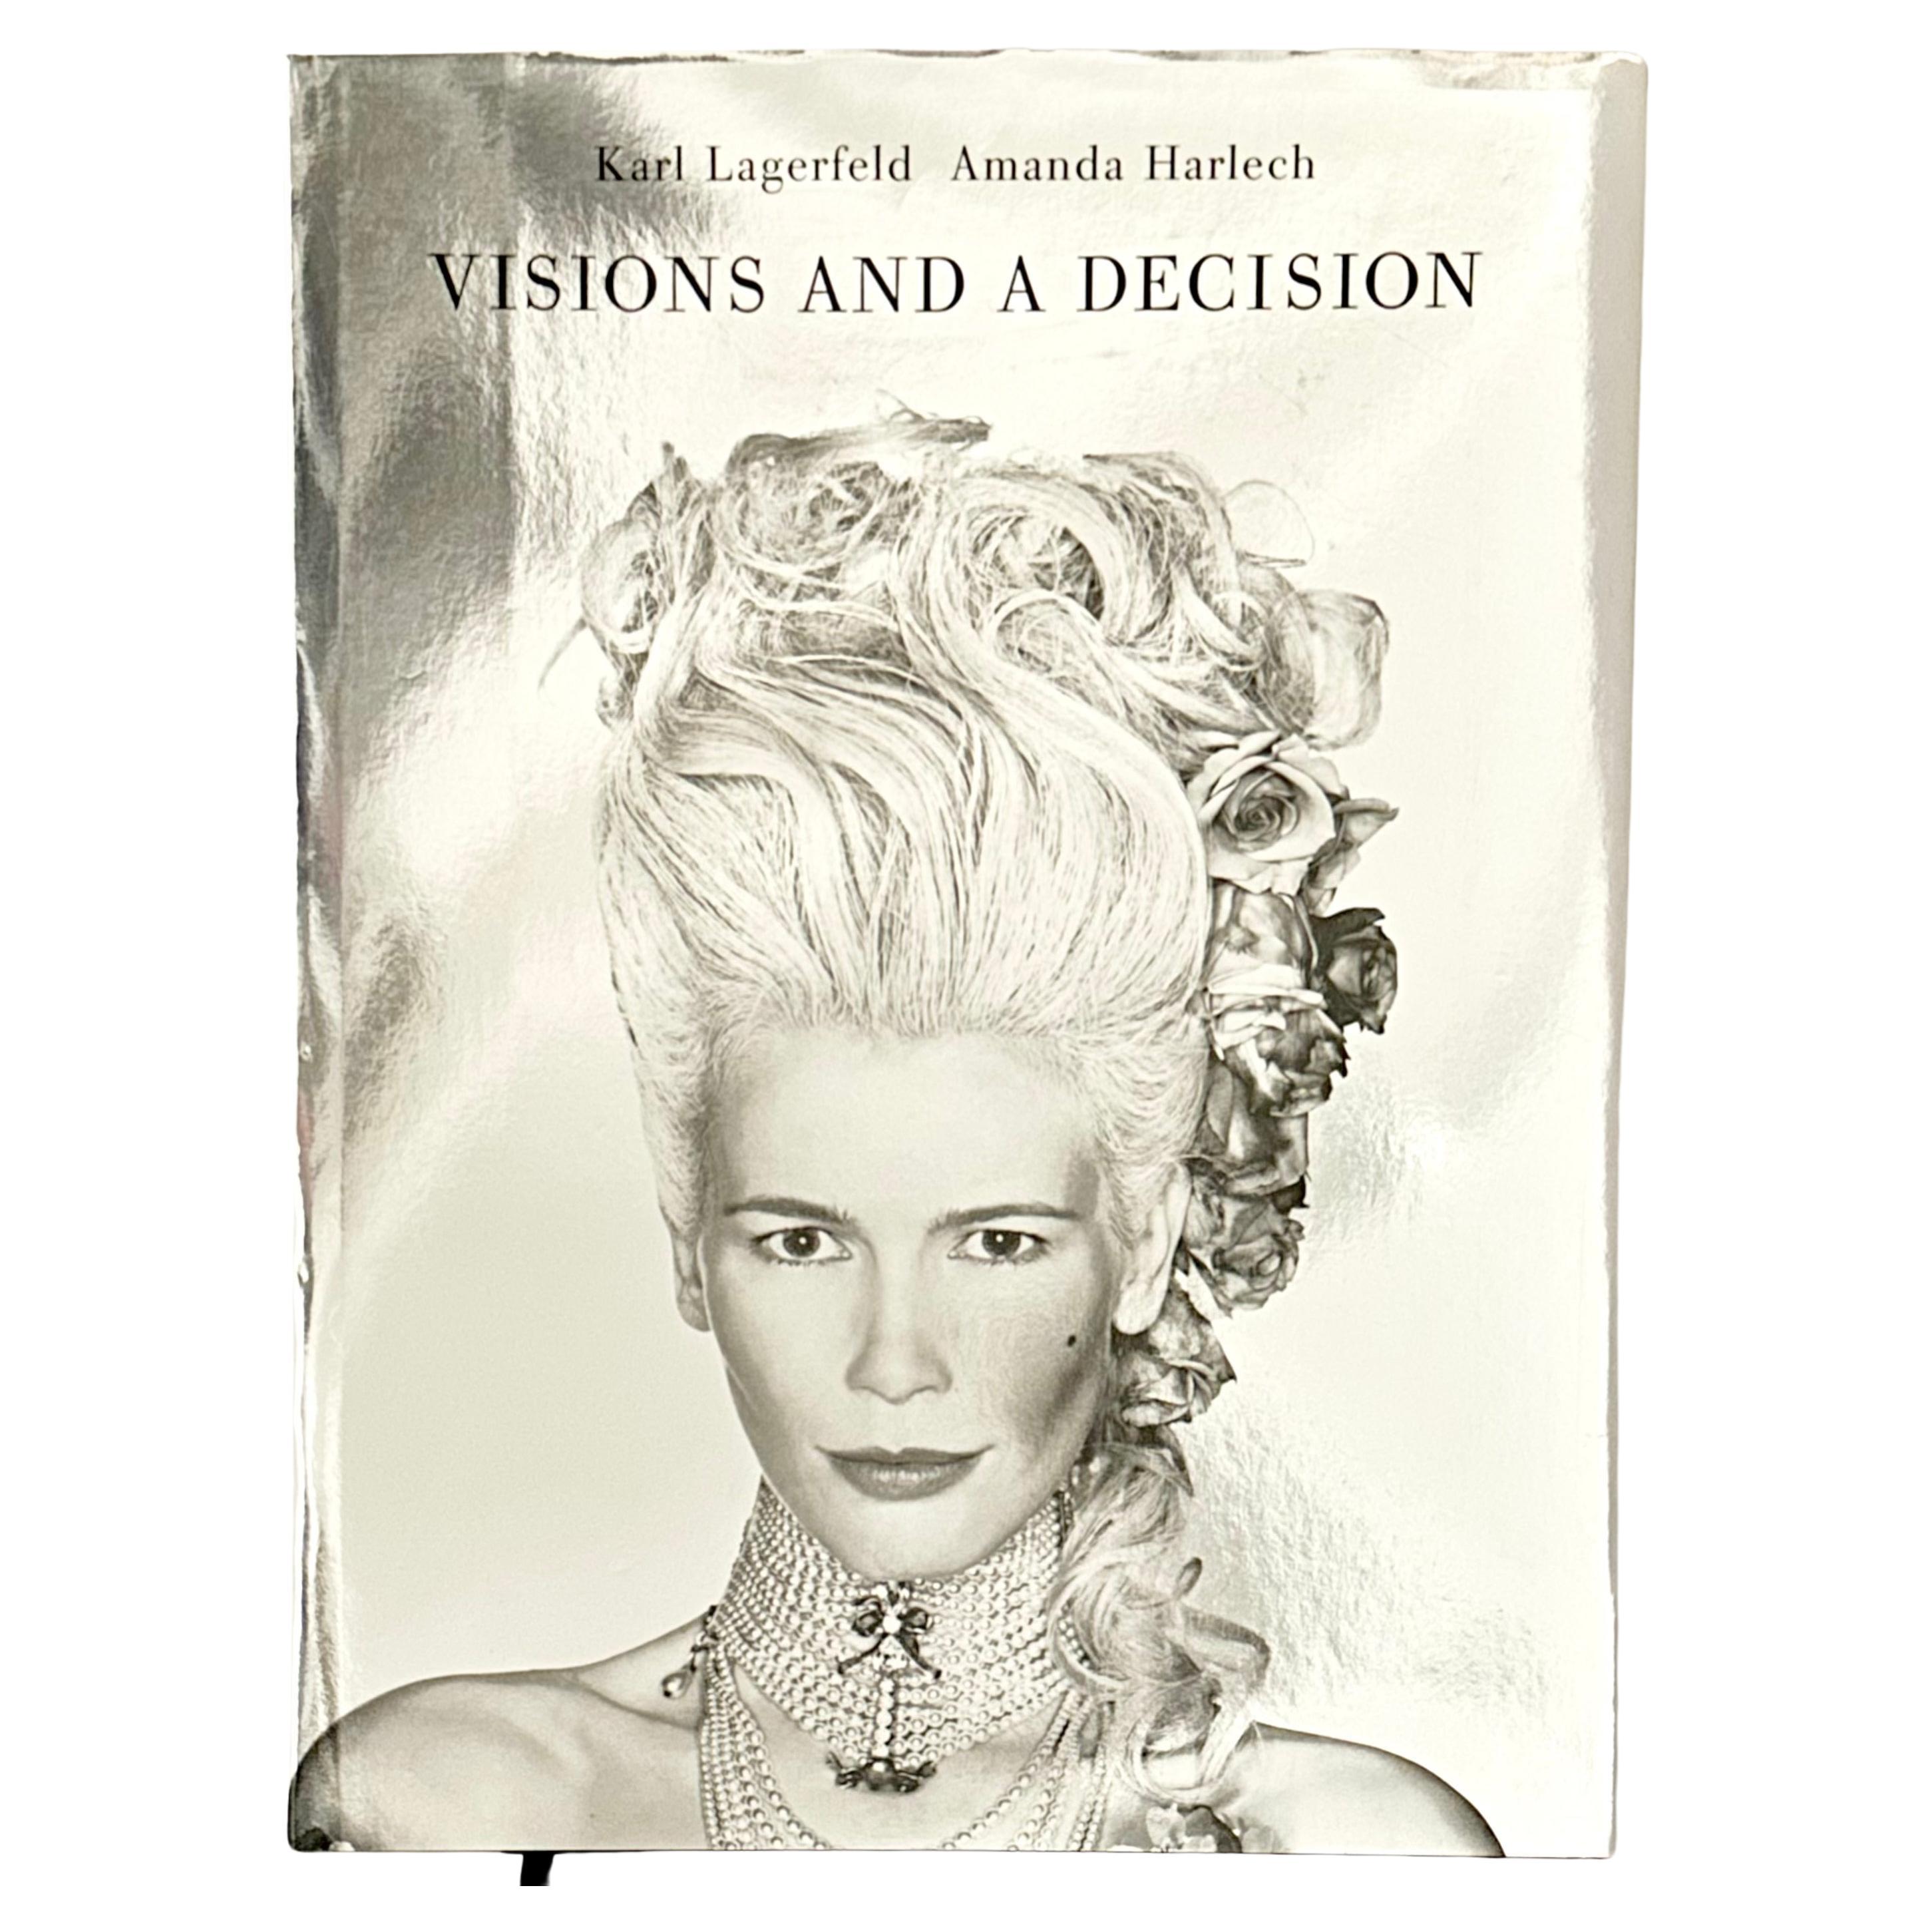 Karl Lagerfeld, Visions and a Decision - 2007